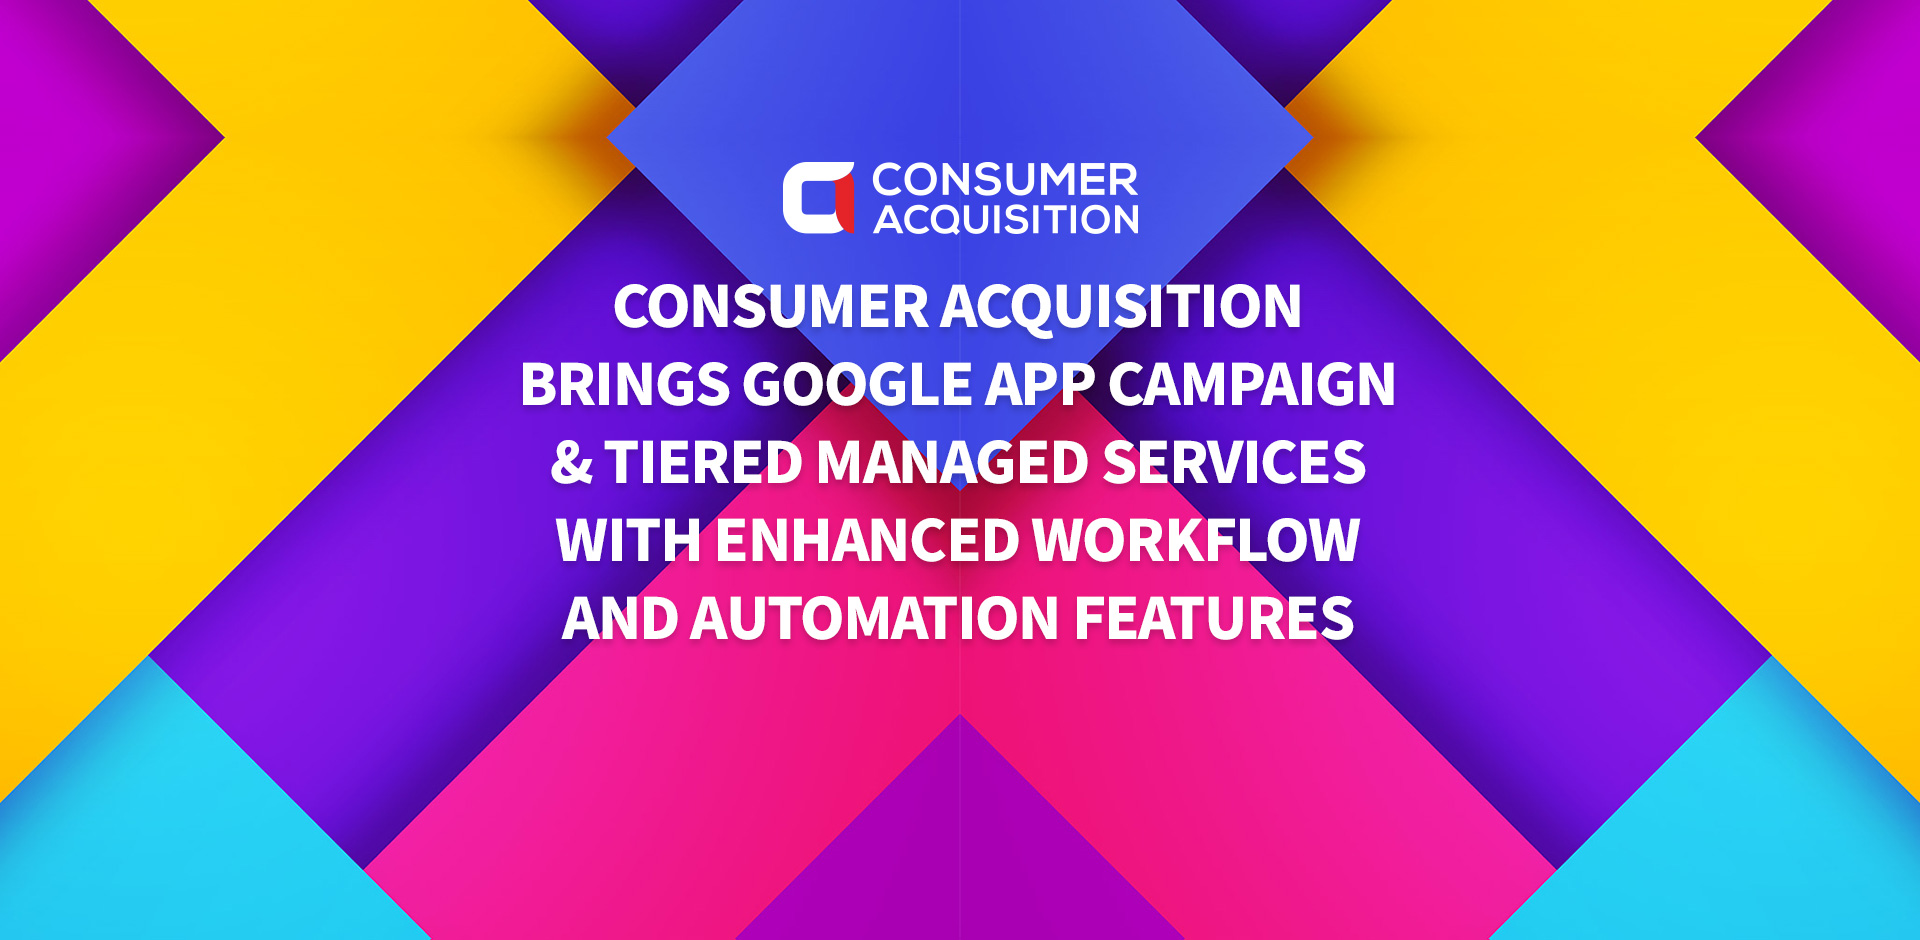 Google App Campaign & Tiered Managed Services Offered by Consumer Acquisition With Enhanced Workflow and Automation Features